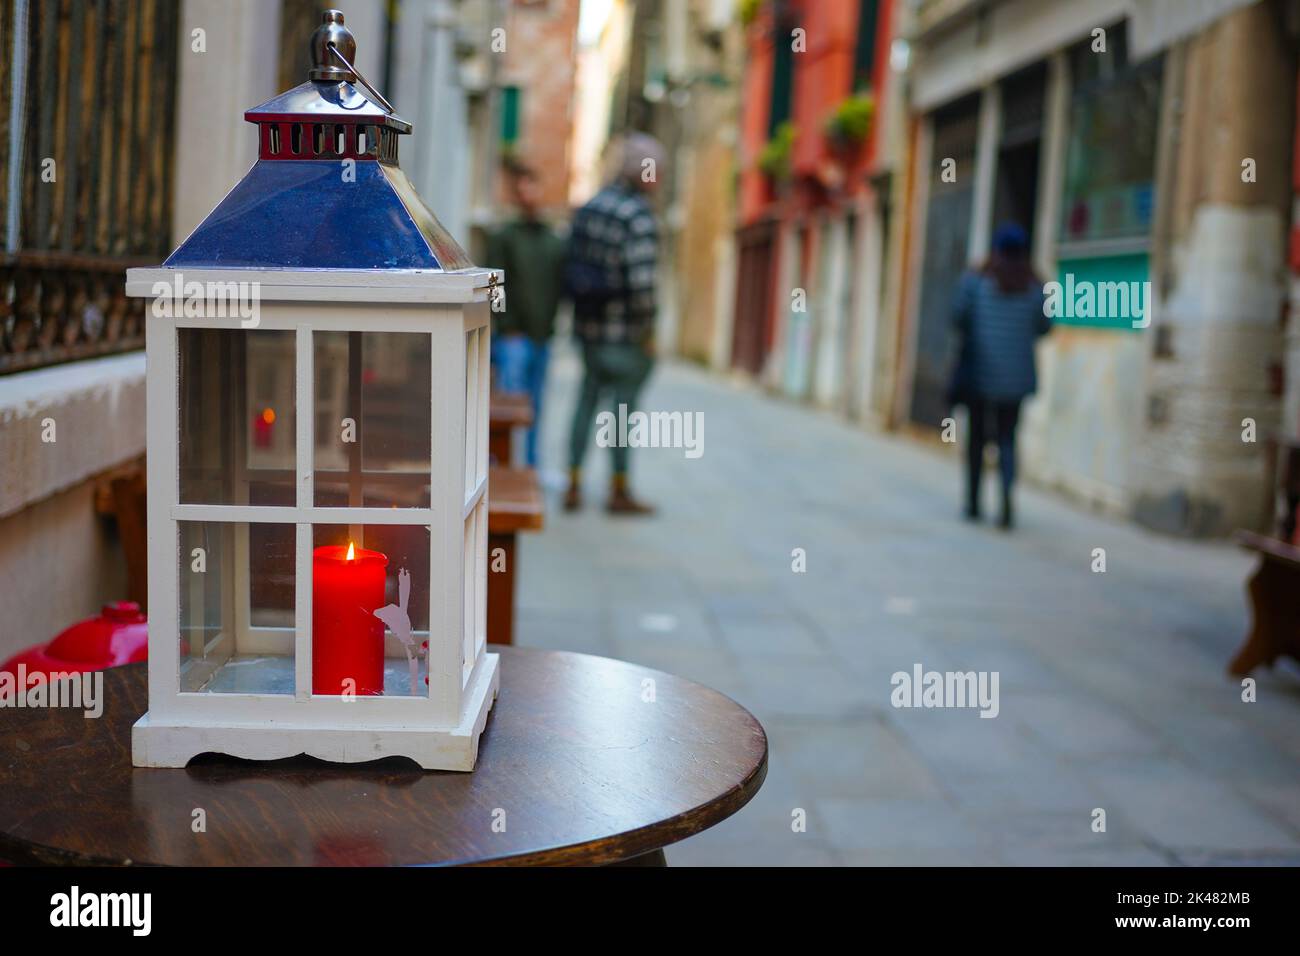 A candle on a cafe table in an alleyway of Venice, Italy Stock Photo